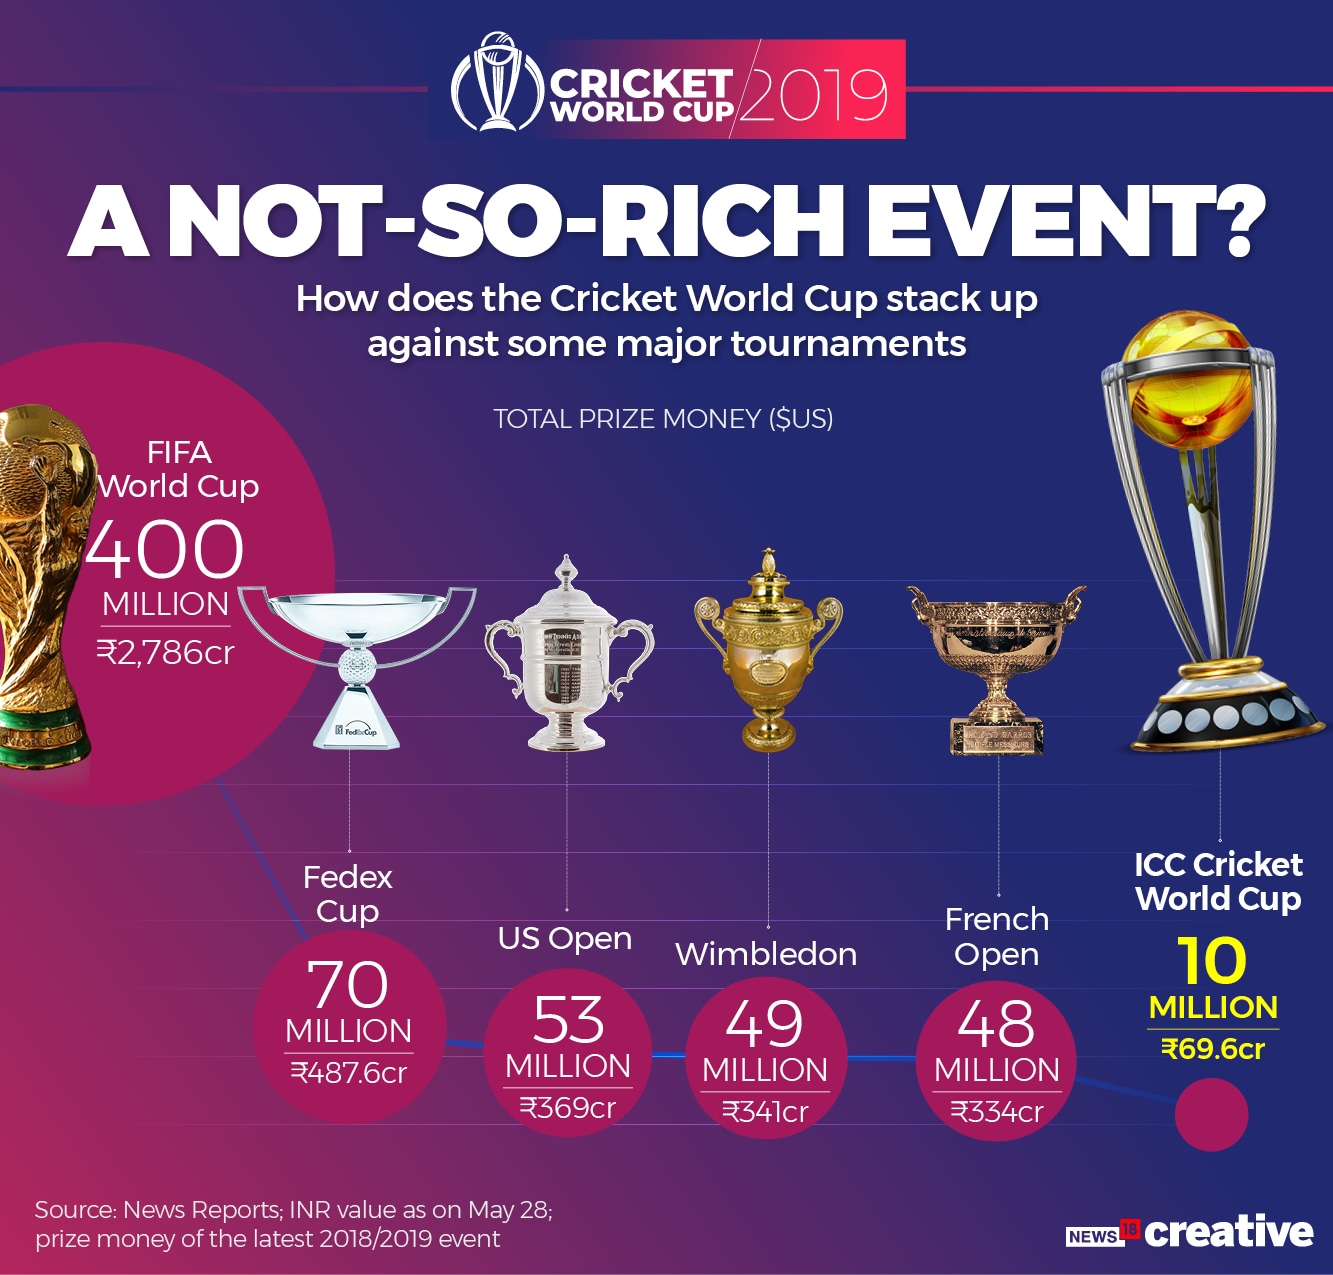 ICC Cricket World Cup 2019 Prize Money and How it Compares to FIFA